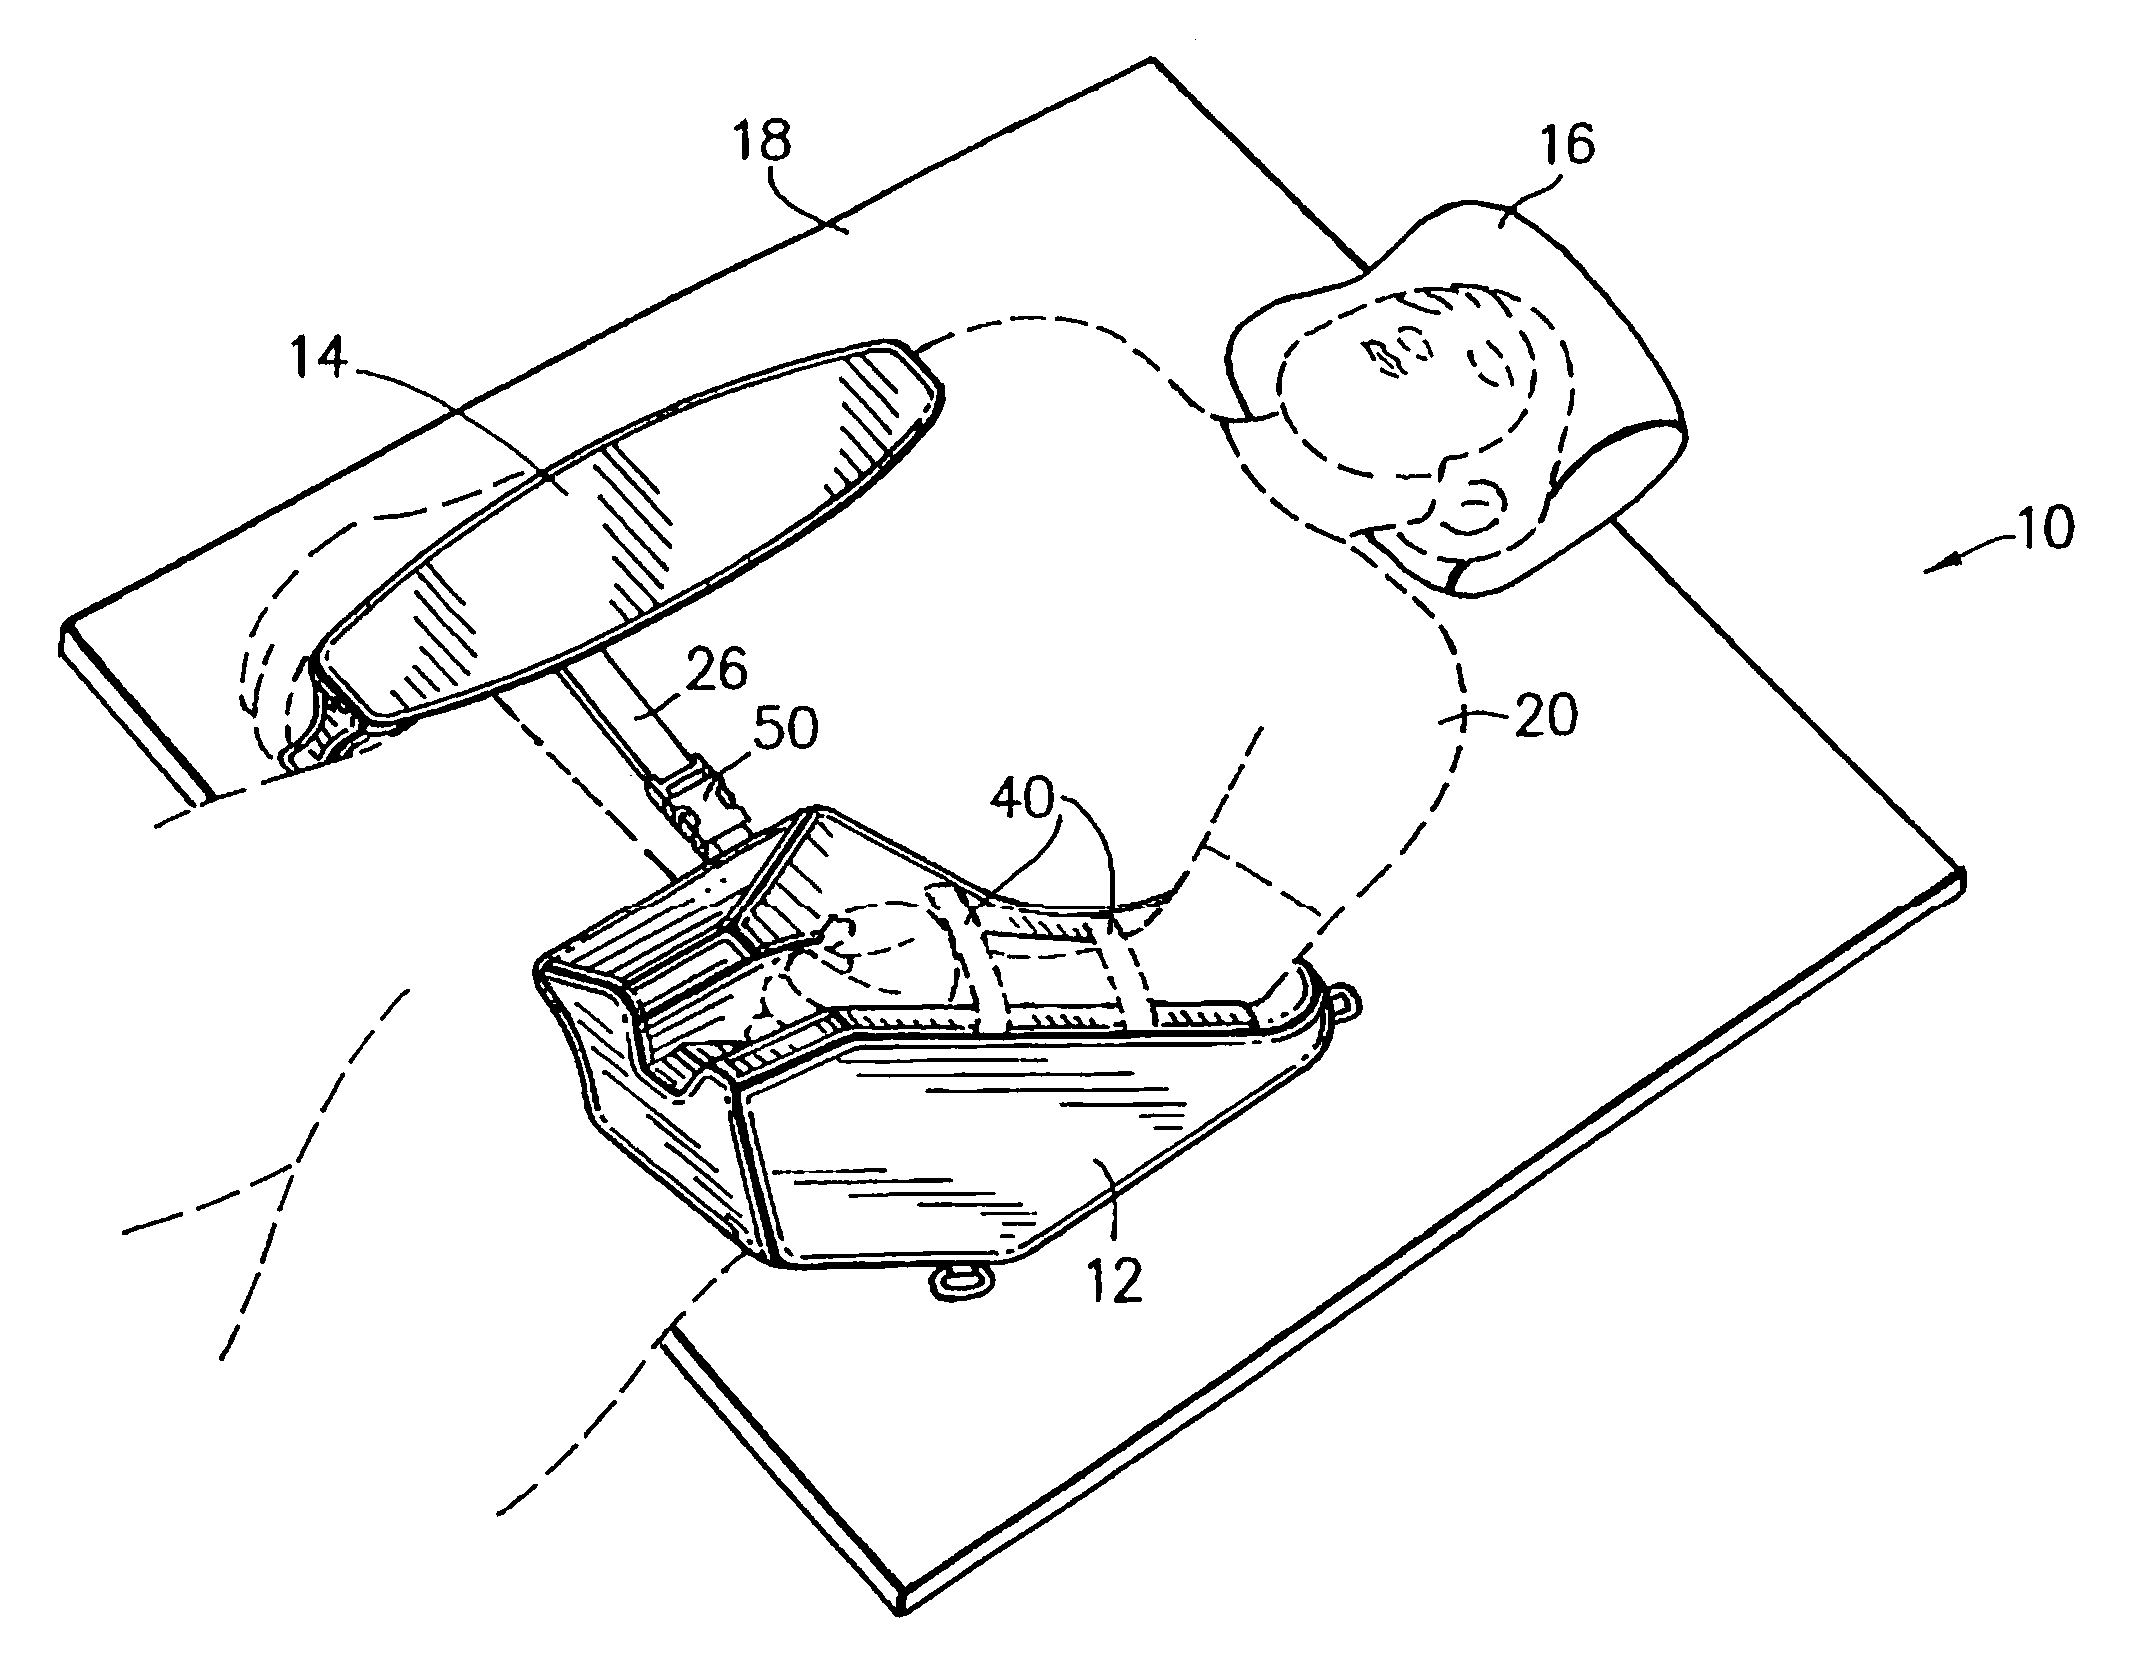 Convertible support system, device, and method for shoulder surgery patients